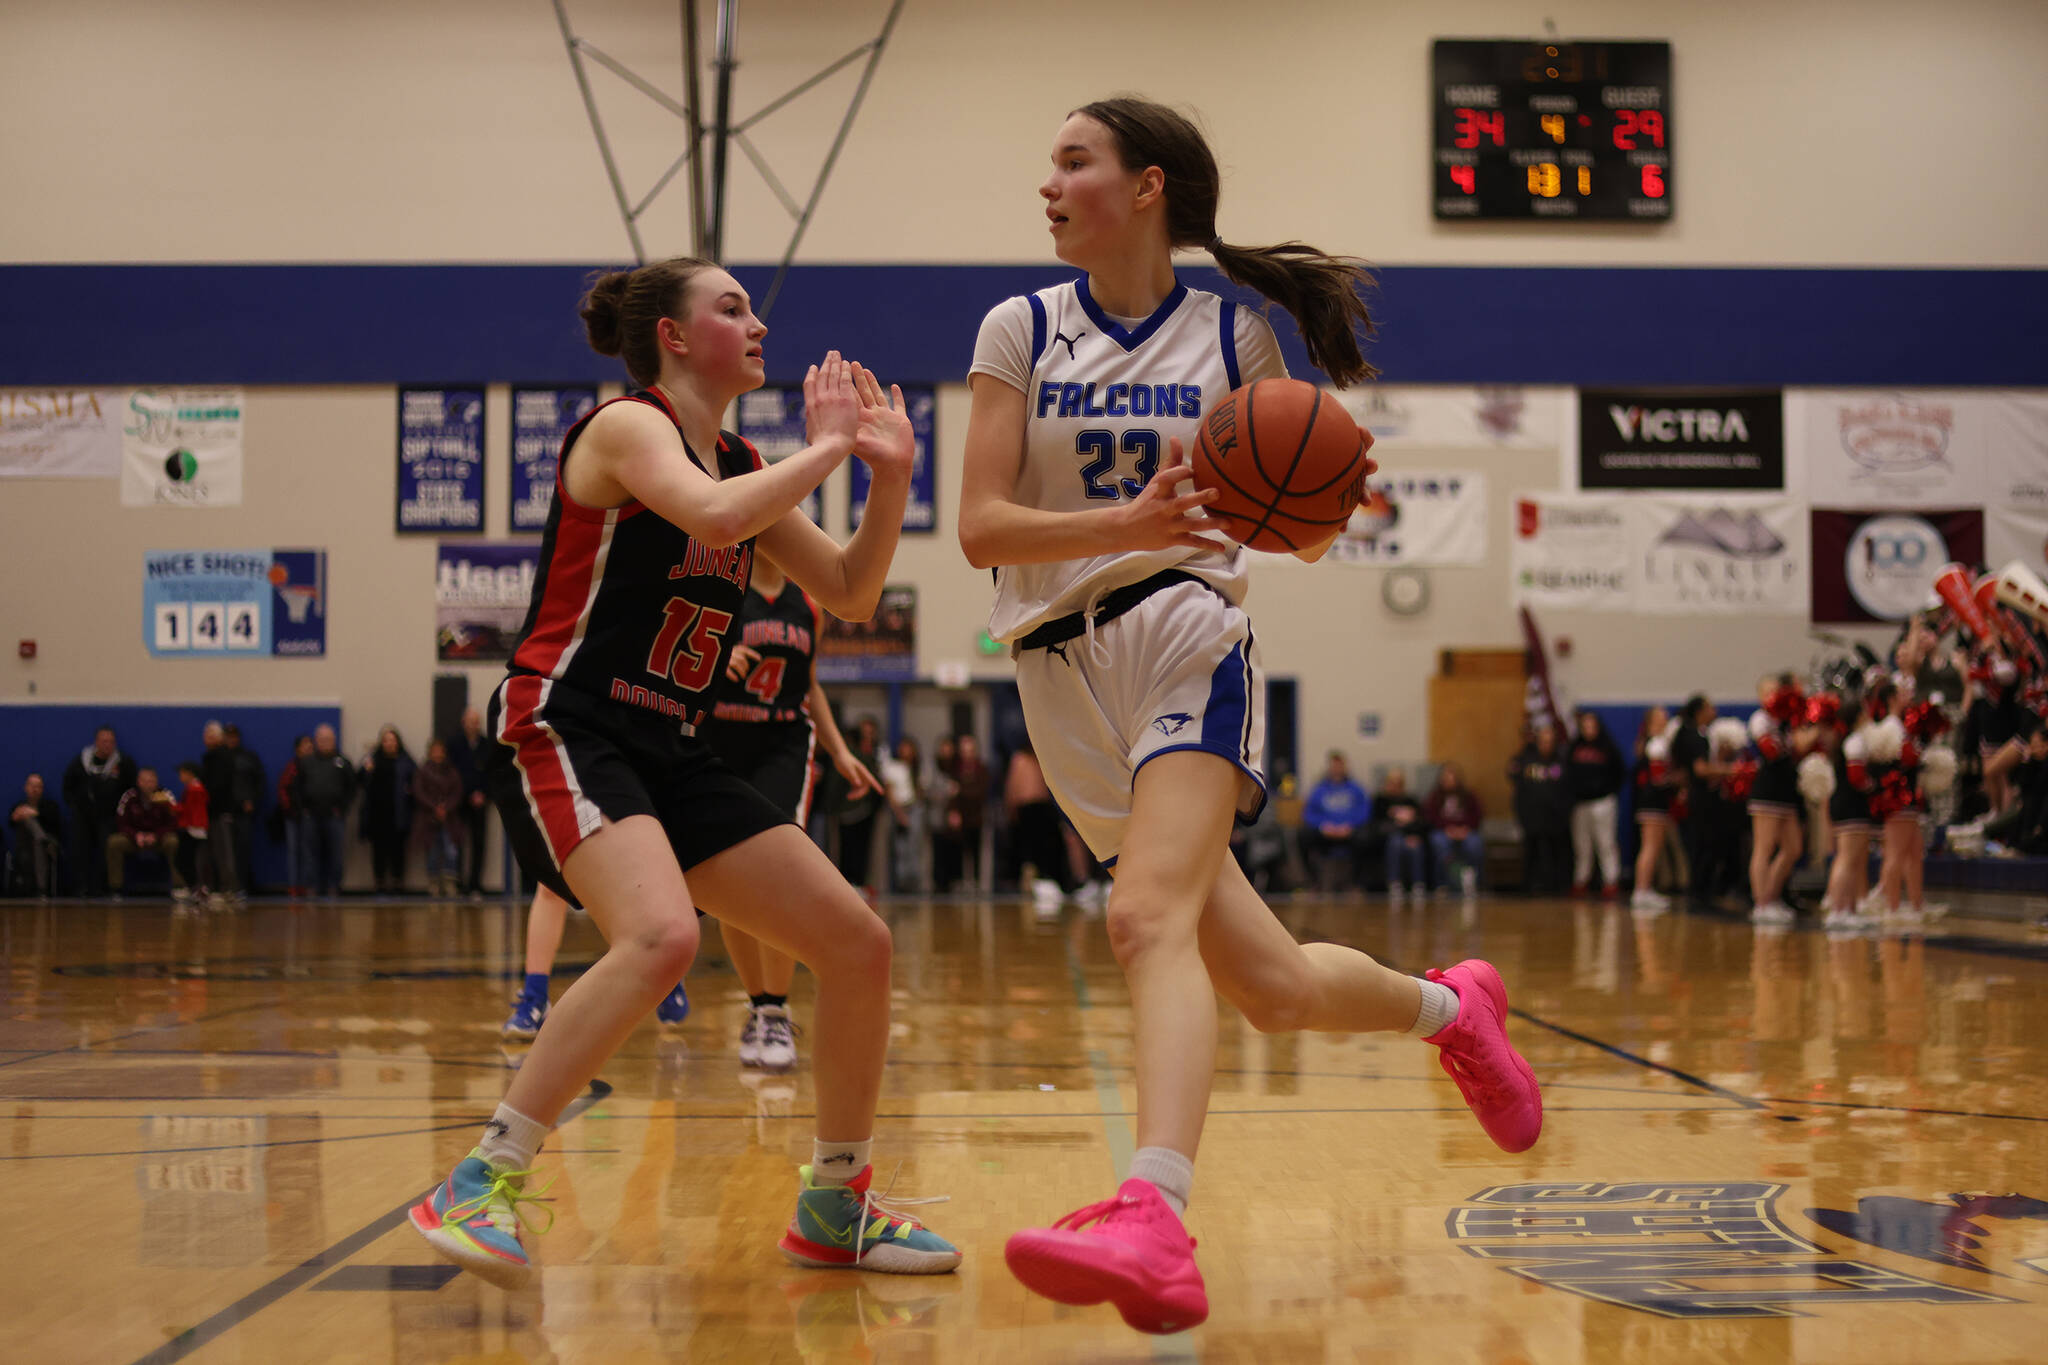 TMHS’ Cailynn Baxter (23) drives while guarded by JDHS’ Gwen Nizich (15) during a Region V Tournament game at TMHS. Baxter earned second team all-state honors for her play this season.